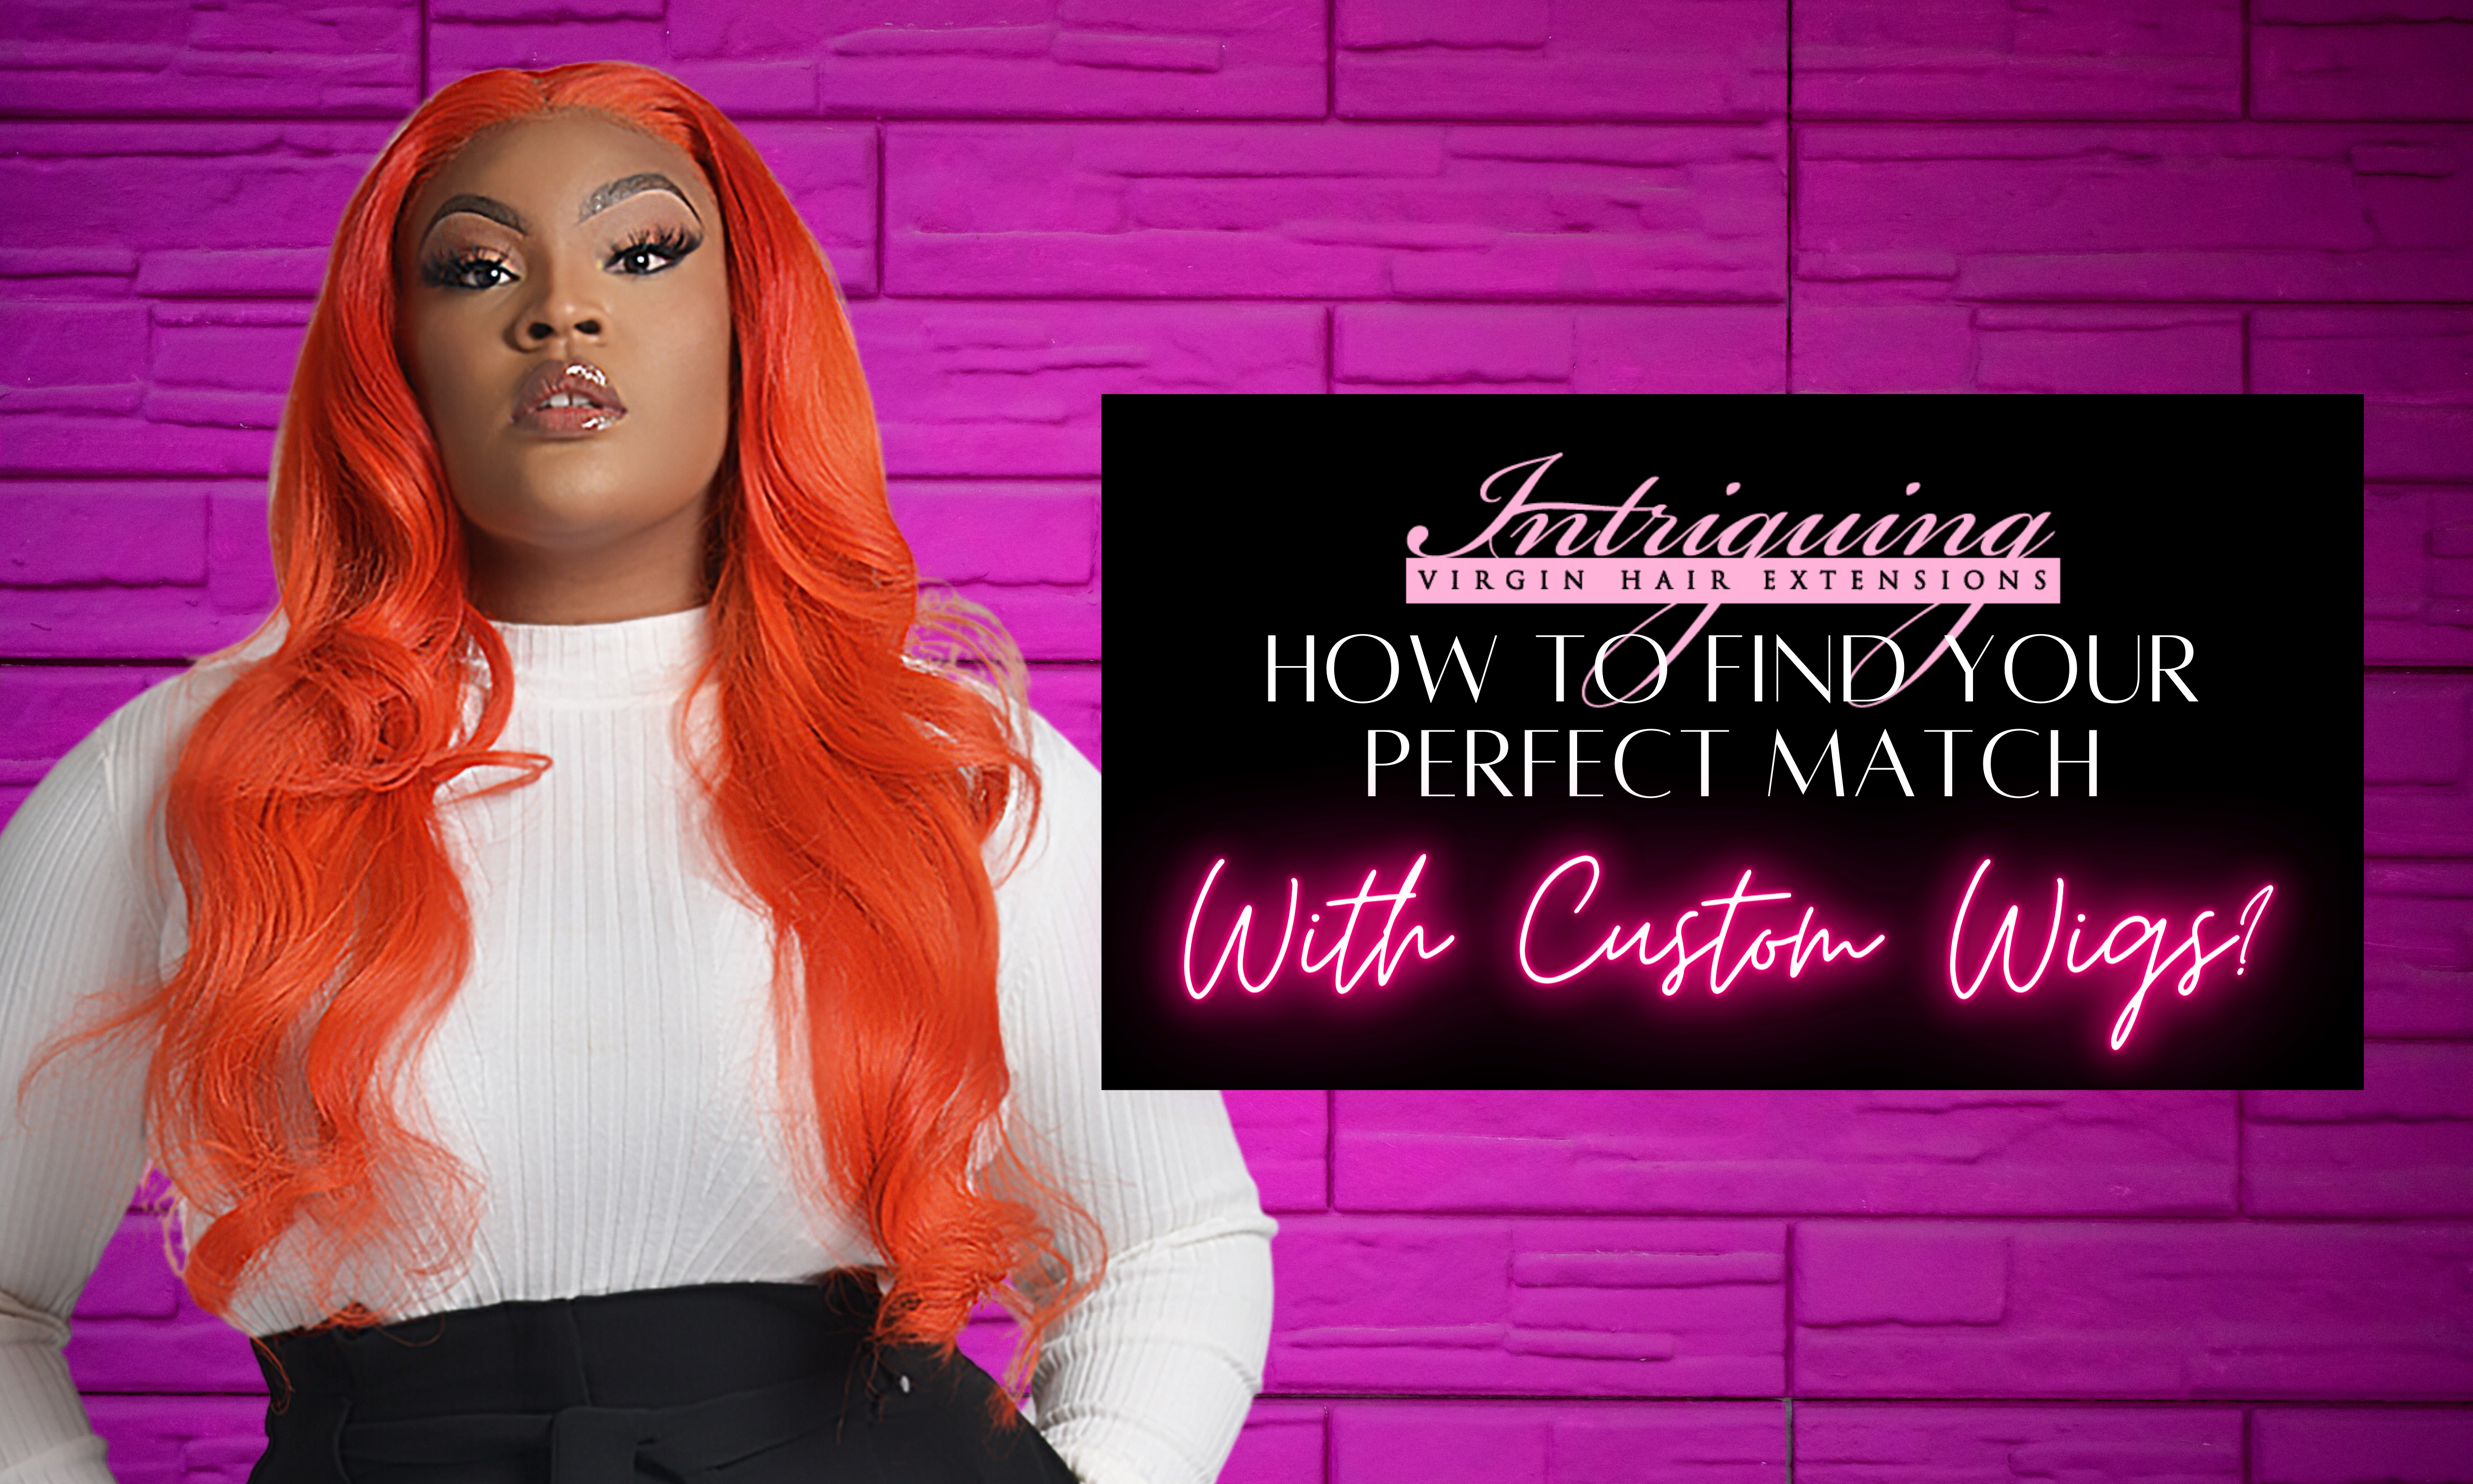 How to Find Your Perfect Match with Custom Wigs?